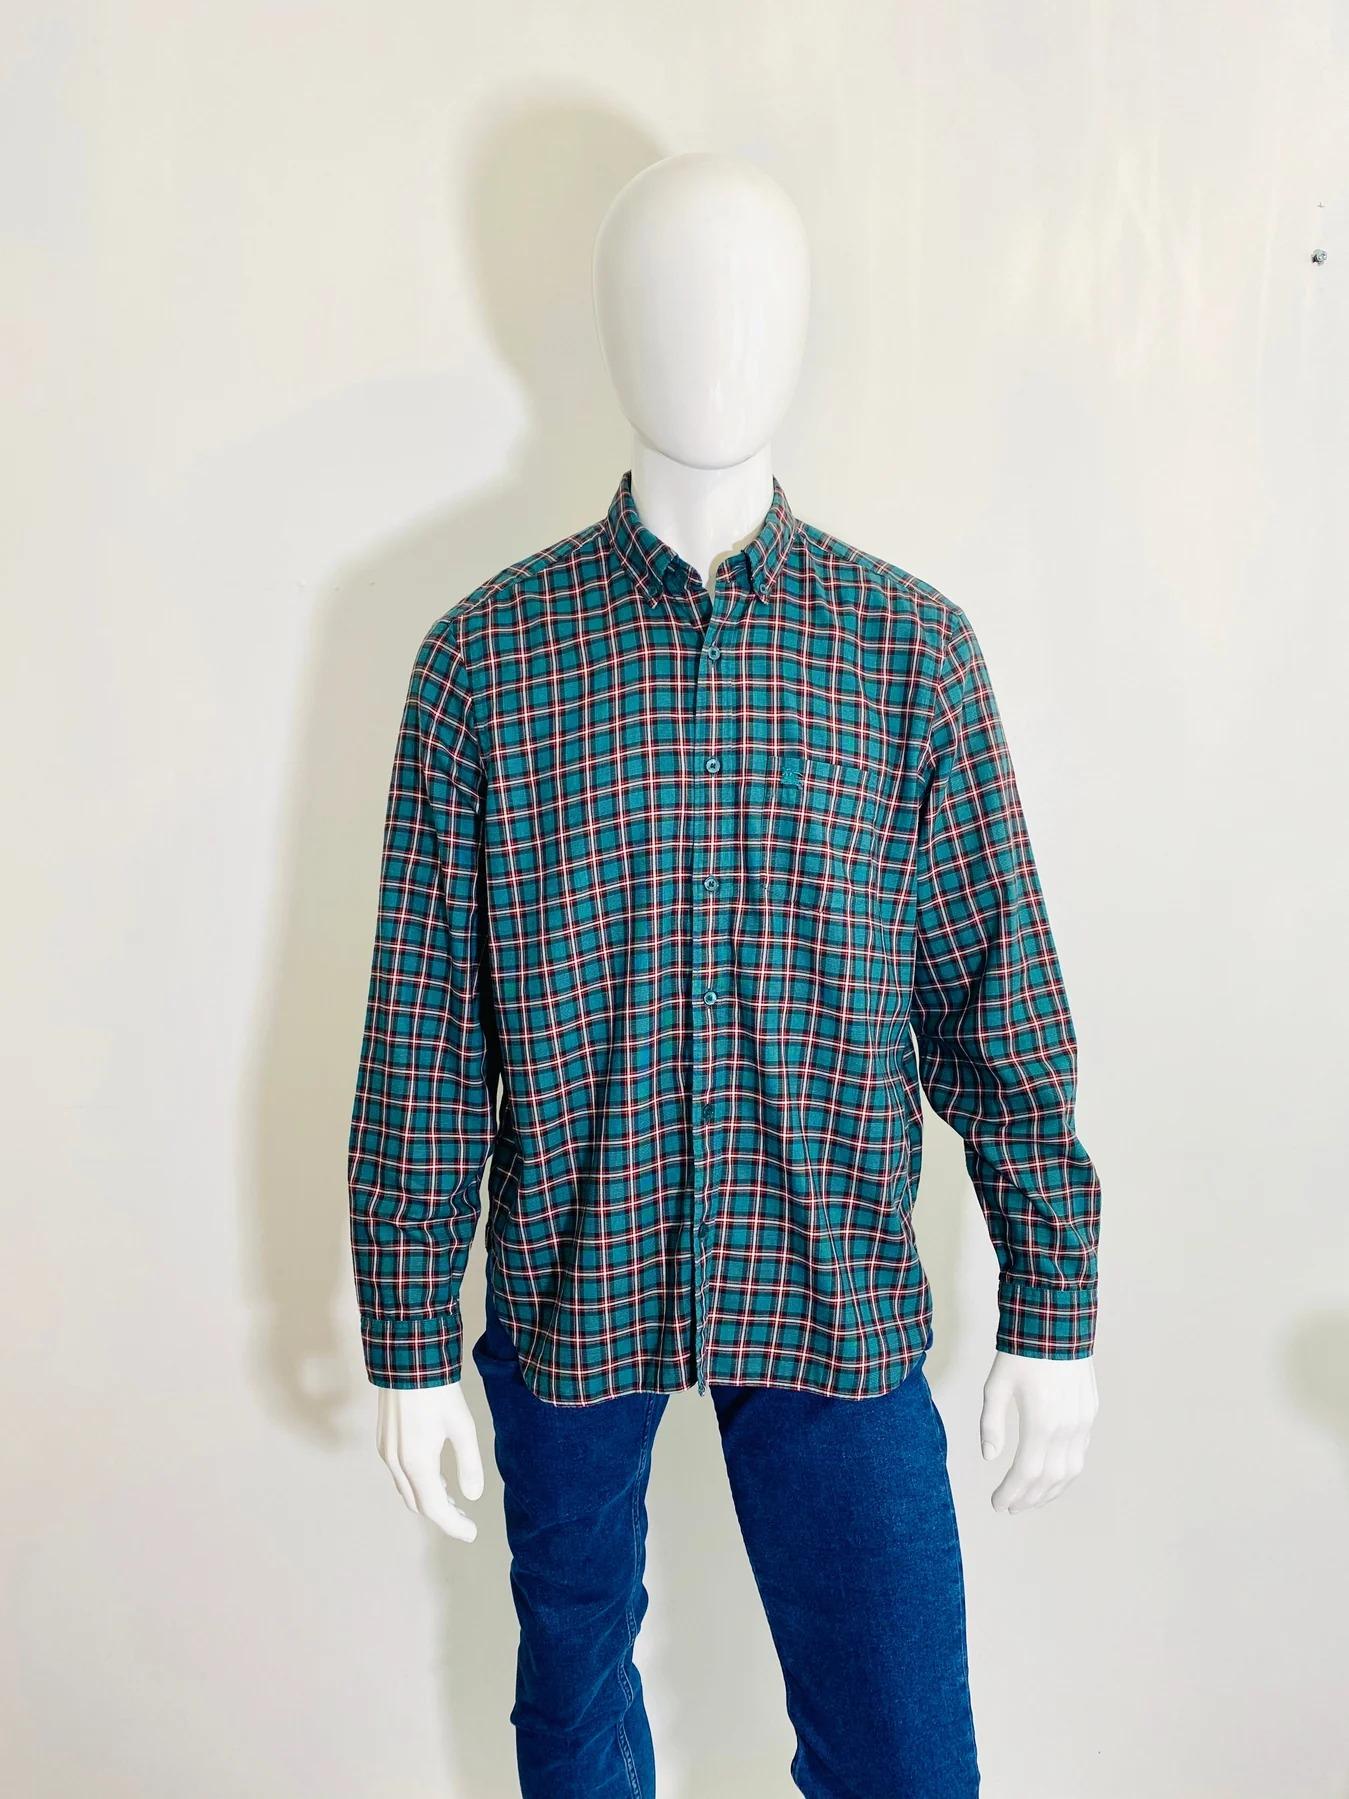 Burberry England Plaid Shirt

Cotton, long sleeve with button cuffs in green, red, white and black. Button down collar and closure with Burberry logo buttons. Burberry embroidered logo to the chest pocket.

Additional information:
Size –